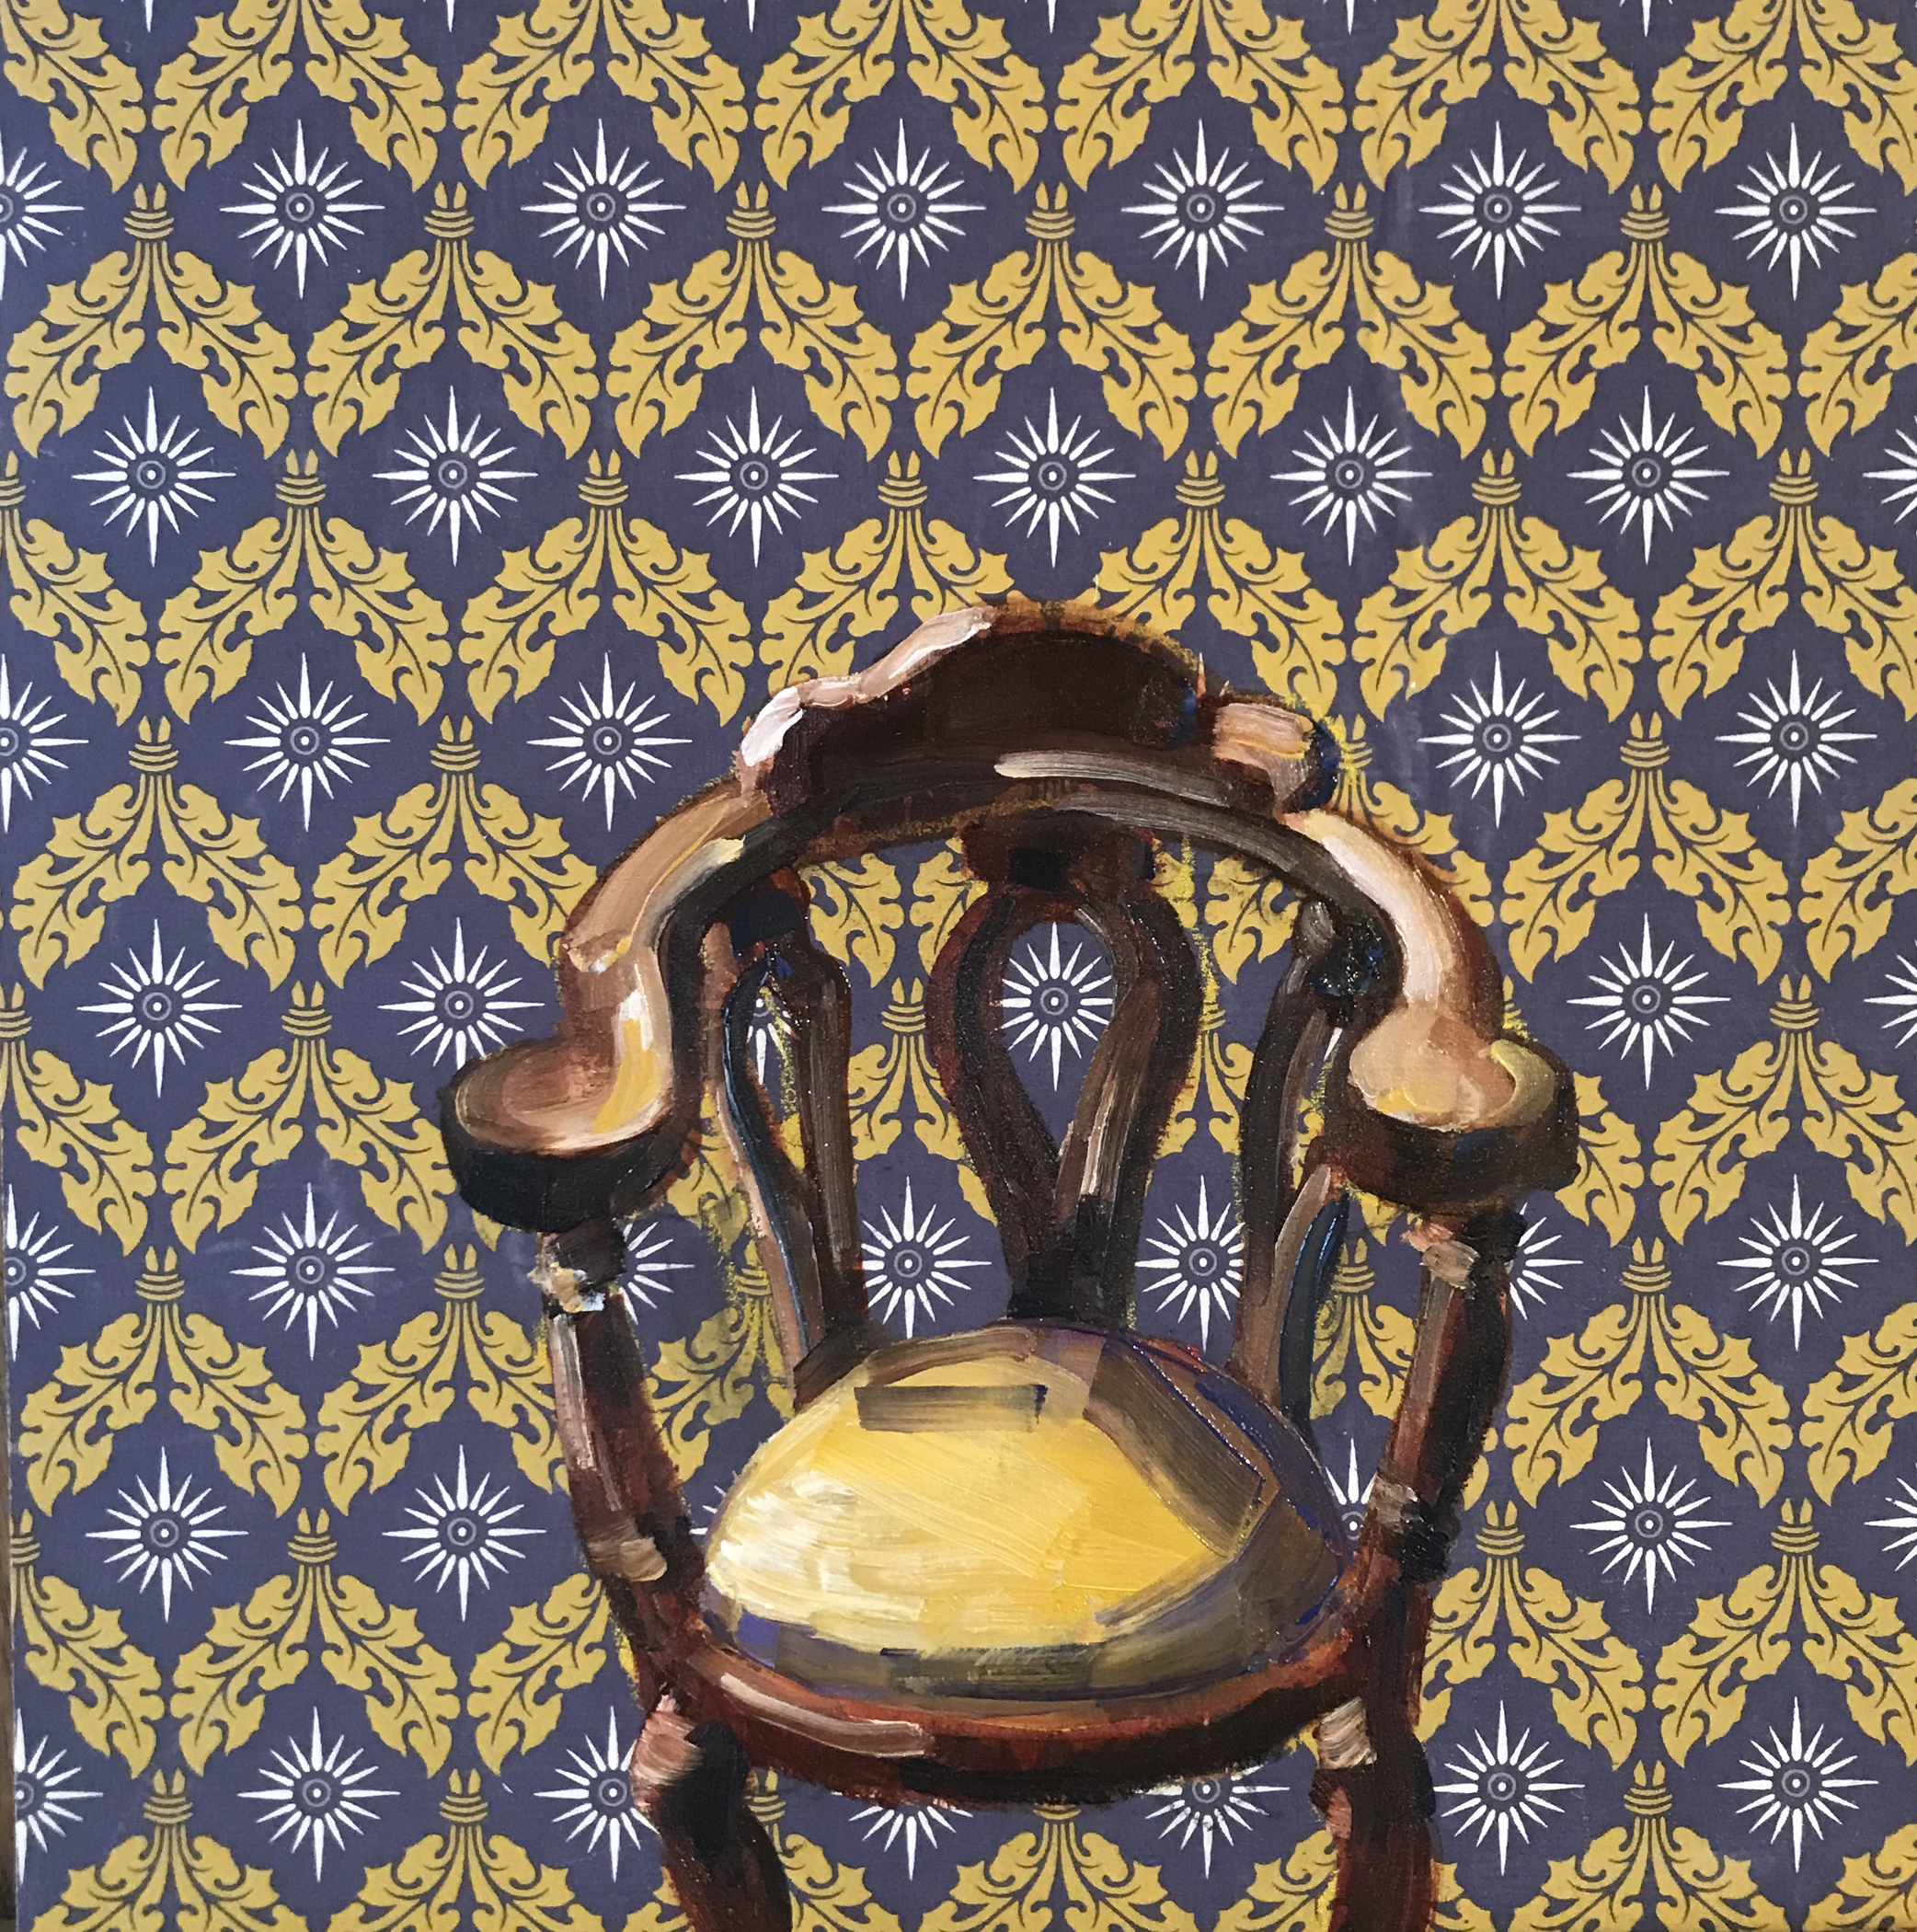 A painting of a curved arm chair in front of decorative wallpaper